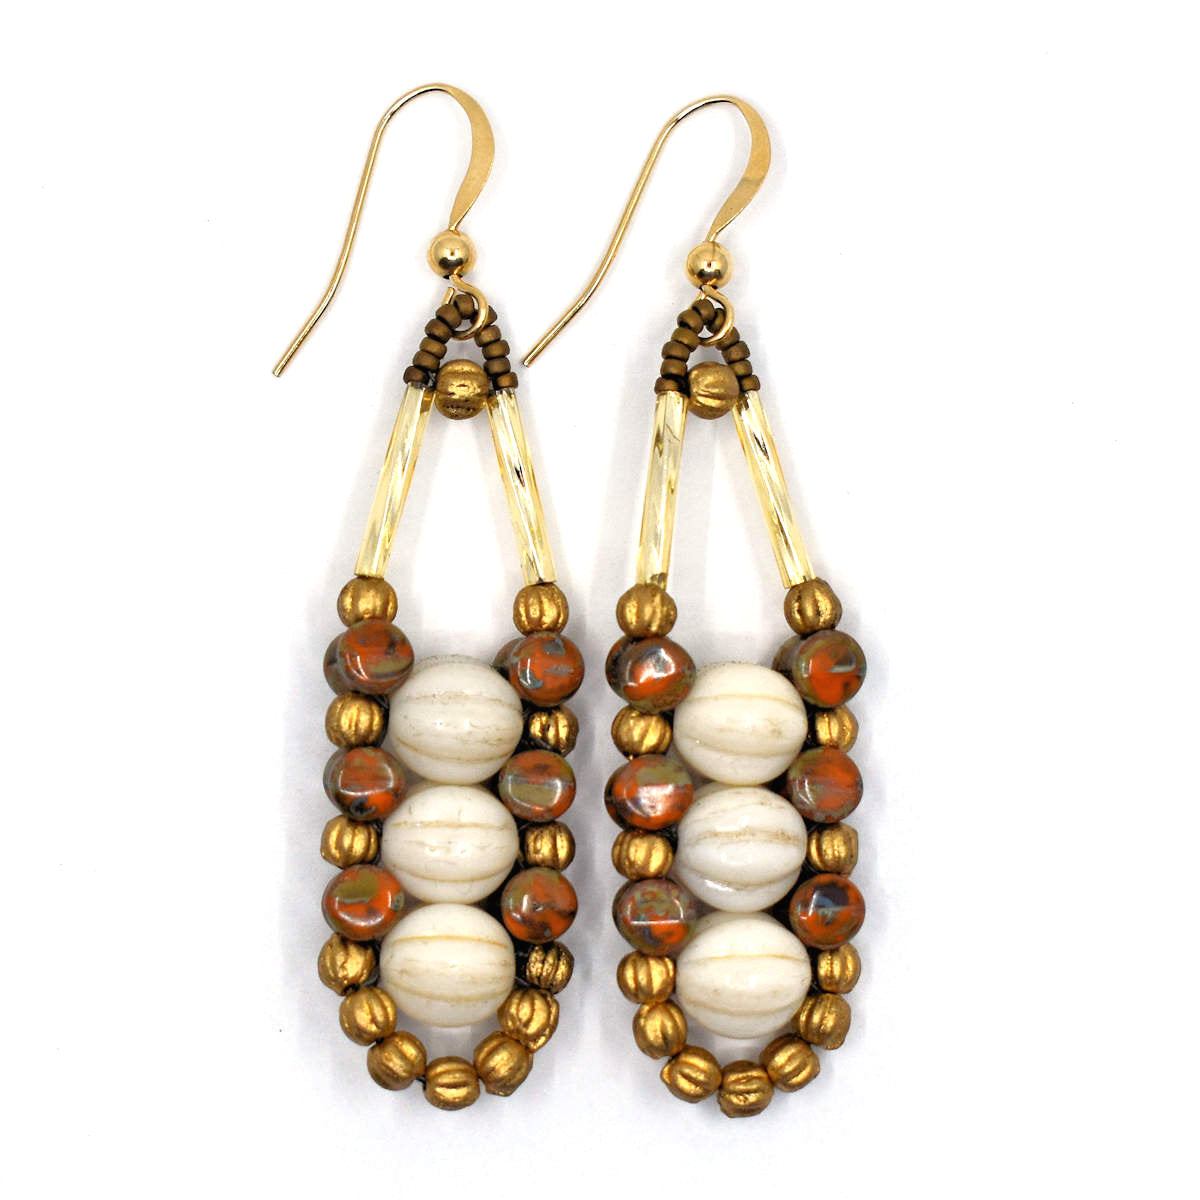 Cream, rust and gold accented earrings with gold ear wires on a white background. These earrings have three ridged cream rounds stacked vertically, held in place by an outline of speckled rusty orange and gold beads. 